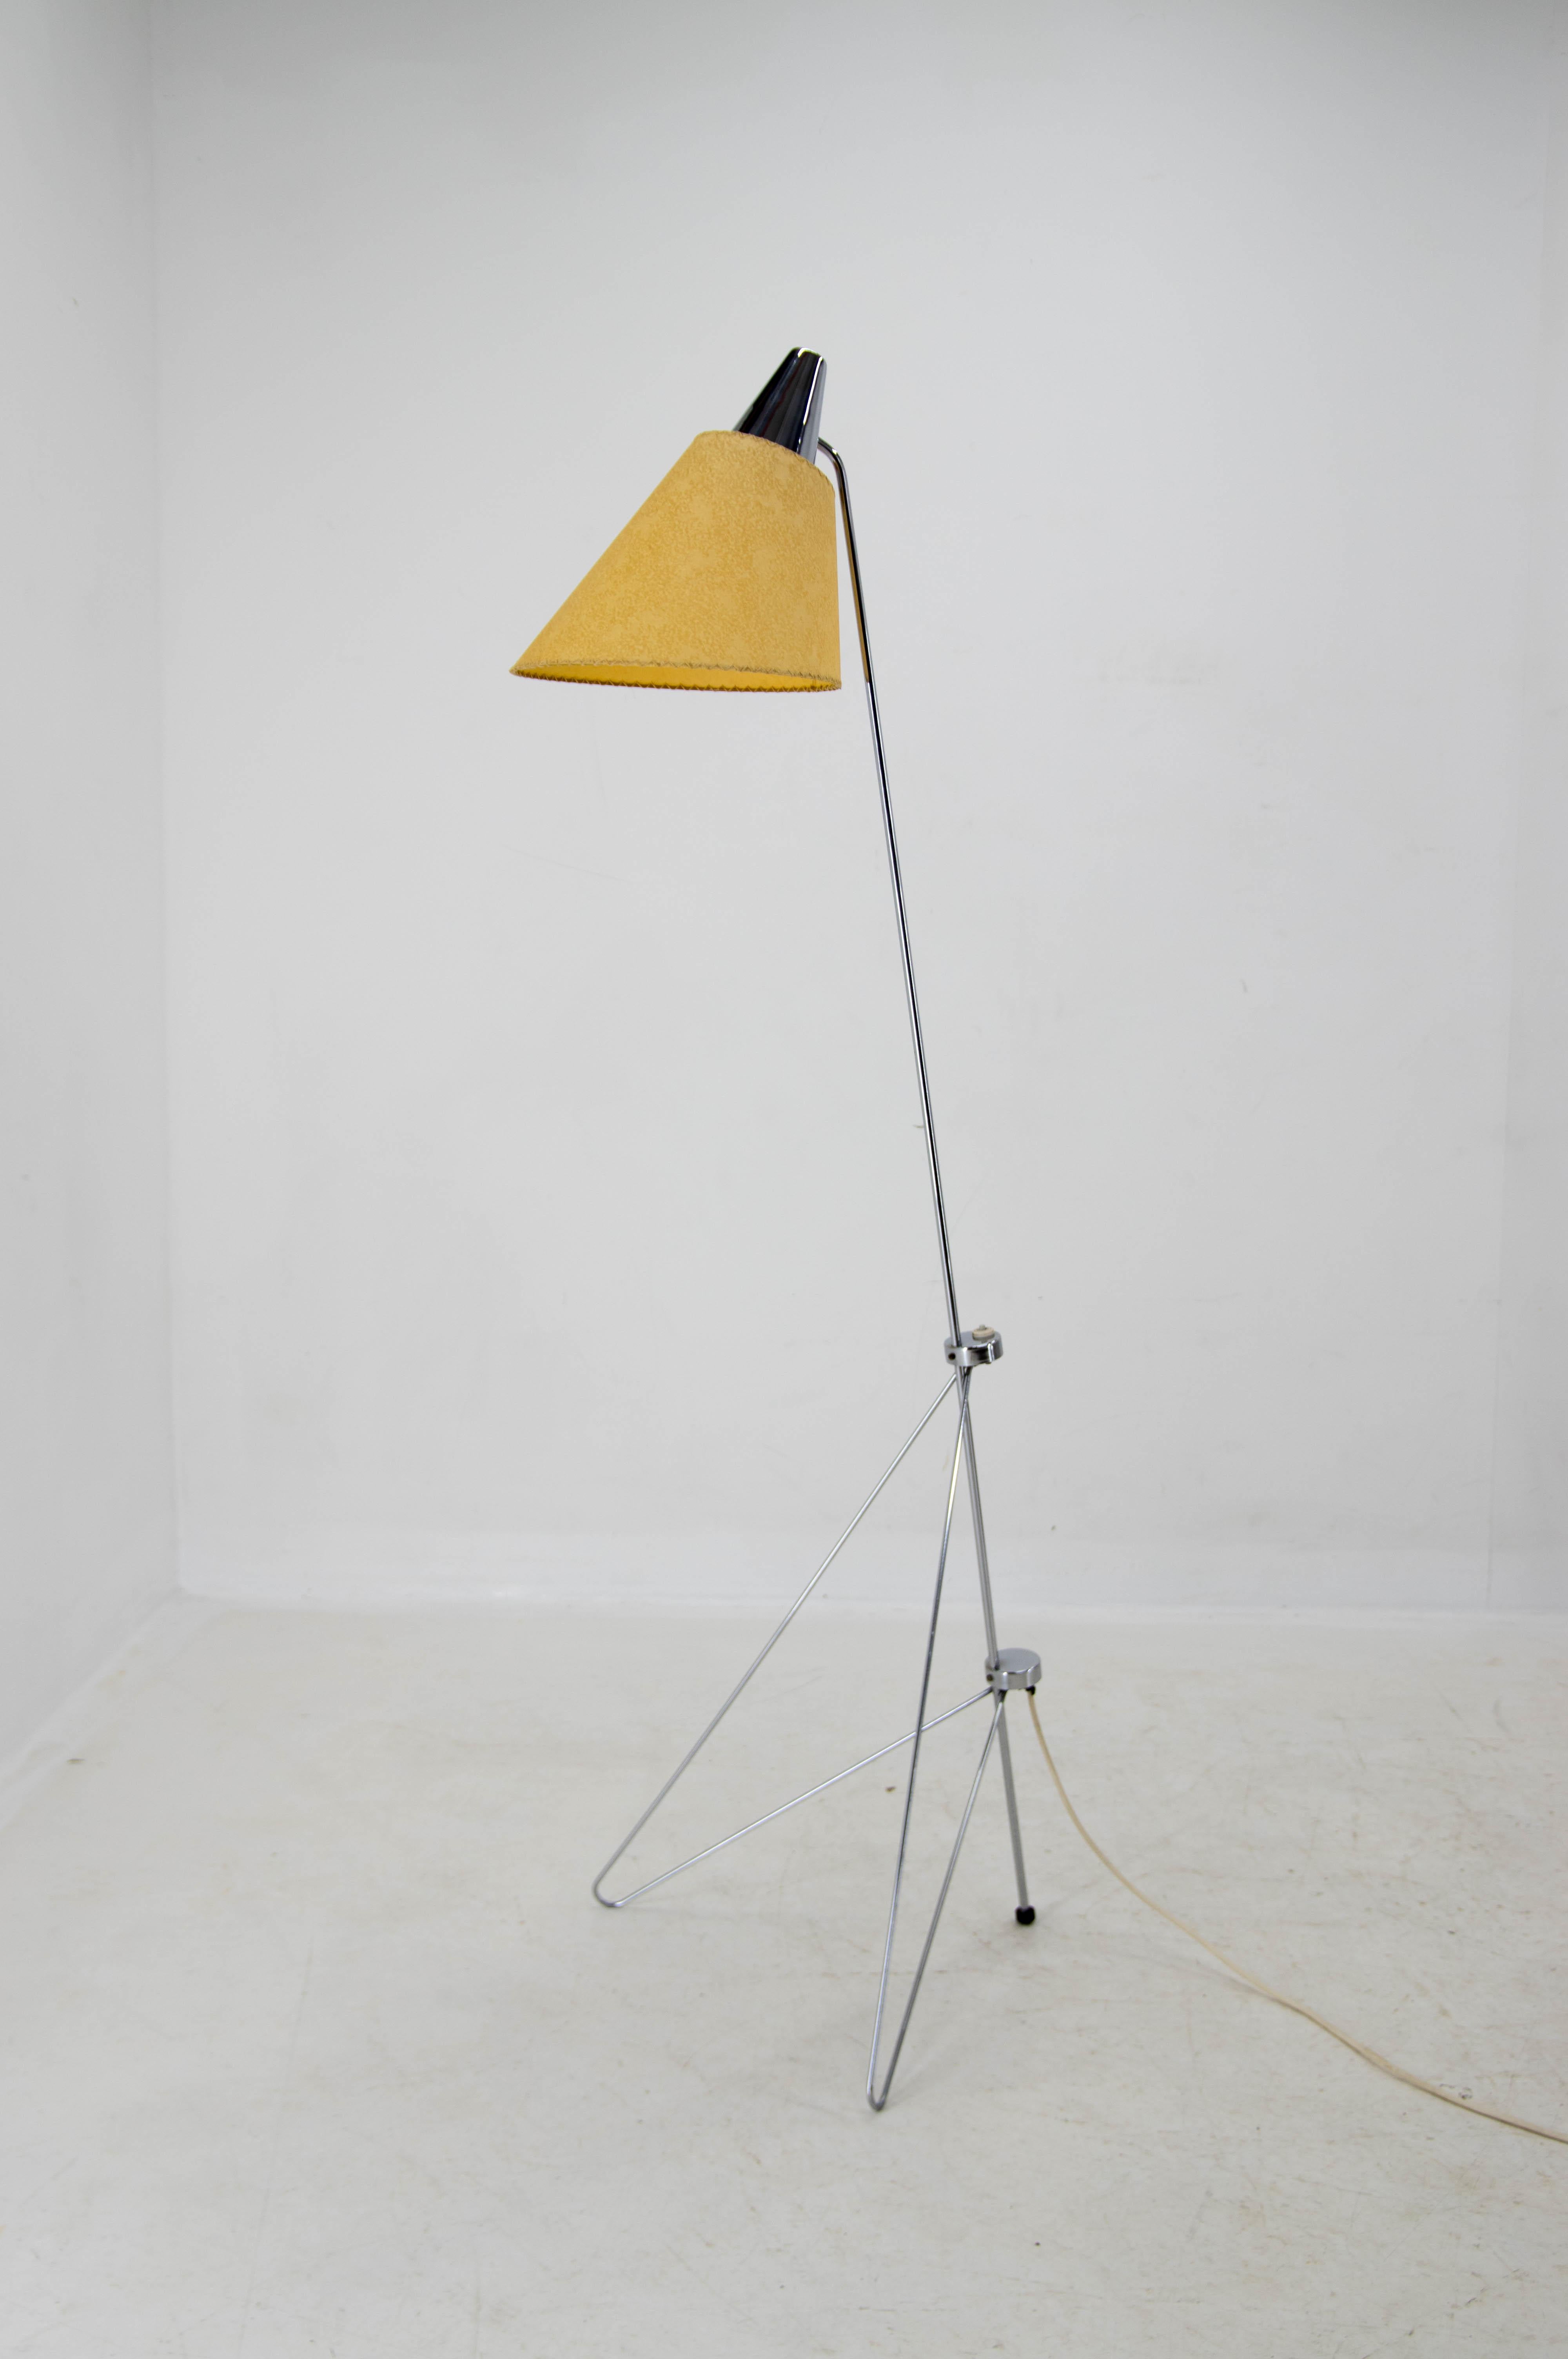 Beautiful rare floor lamp designed in 1950s by Josef Hurka for Napako.
Restored: chrome in very good condition - polished.
New parchment paper shade.
Rewired: 1x60W, E25-E27 bulb
US plug adapter included.